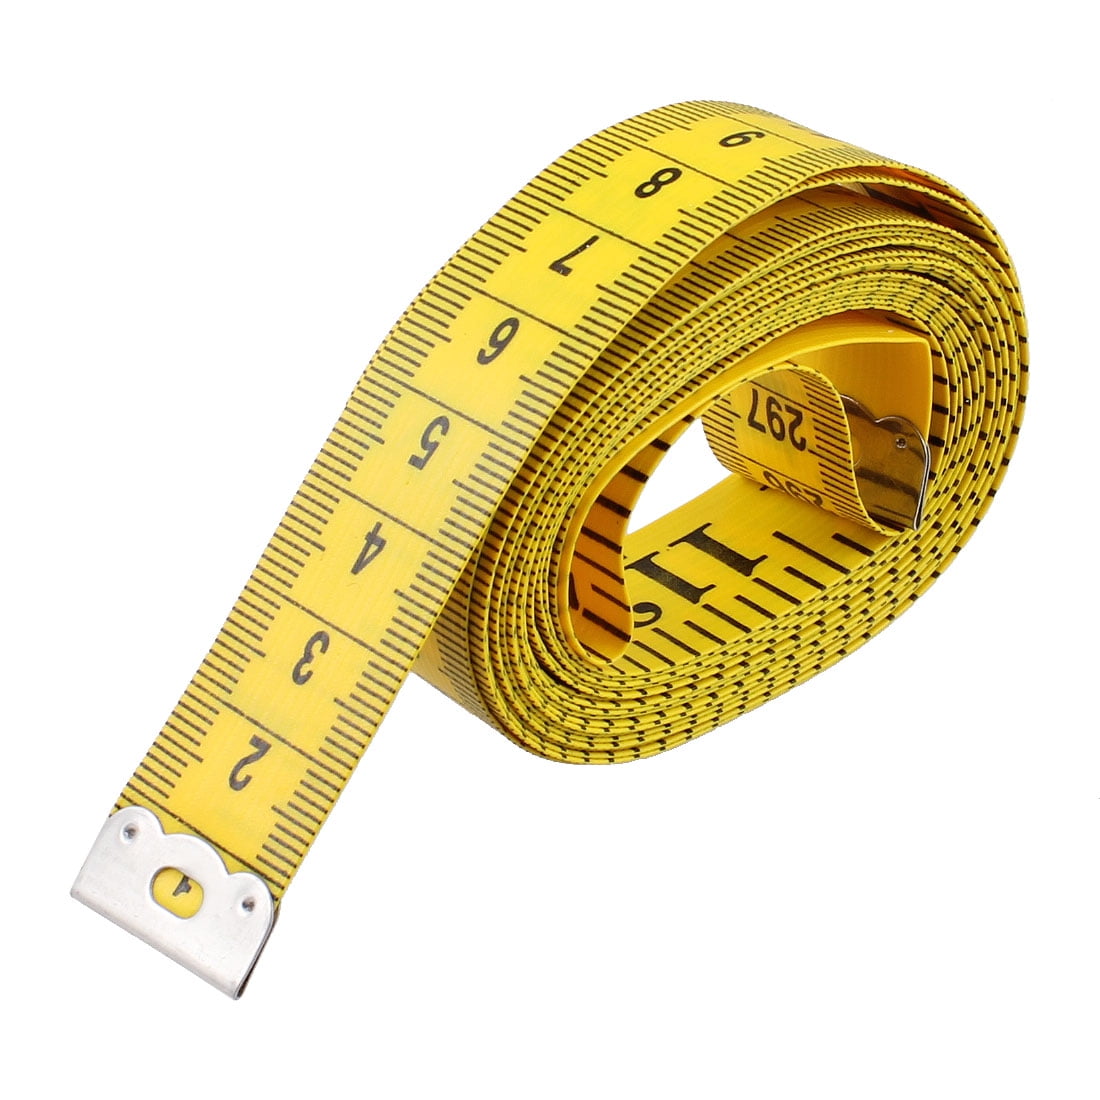 Aexit Body Measuring Tools & Home Improvement Sewing Cloth Tailor Tape Soft Flat Ruler Yellow Tape Measures 60 150cm 